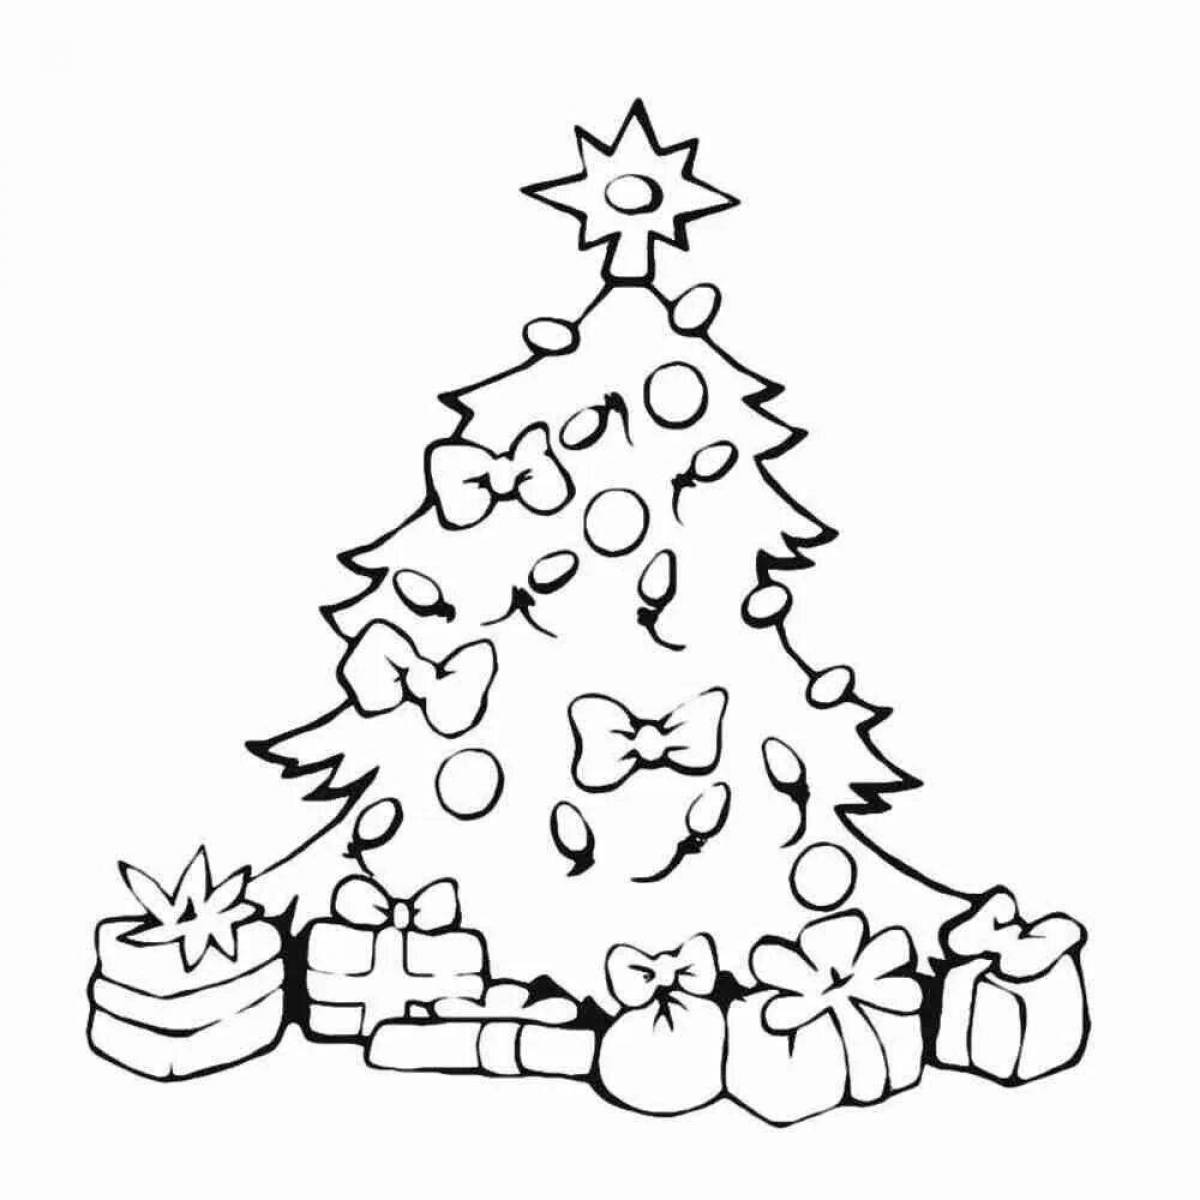 Bright Christmas tree coloring card